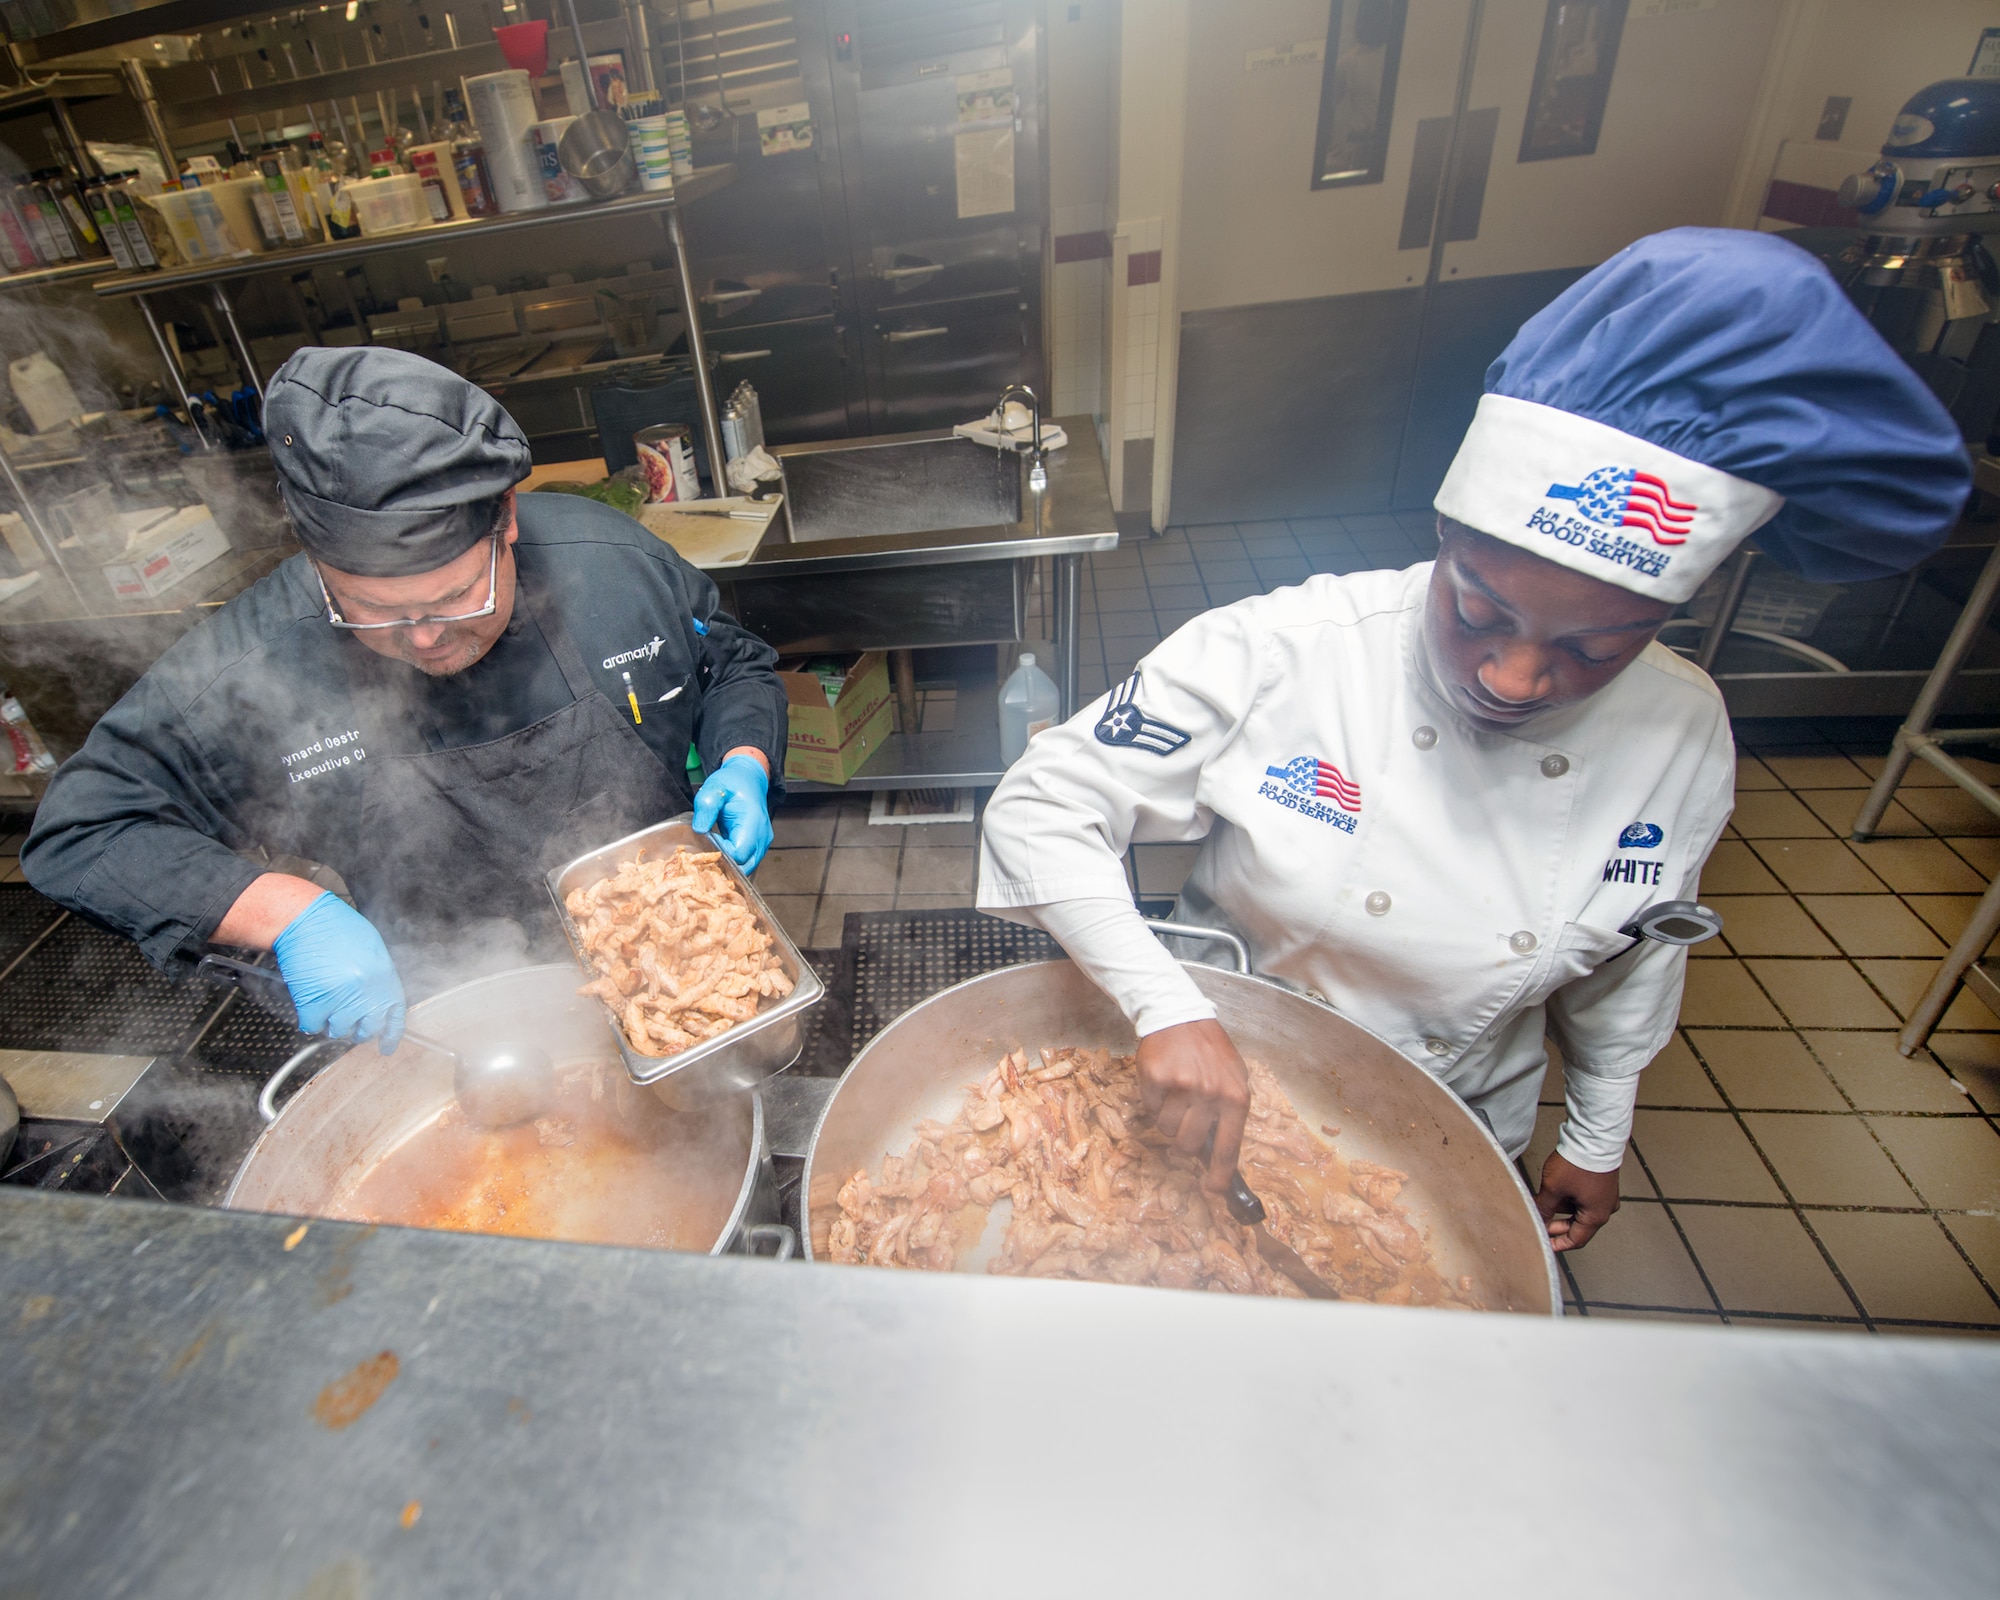 Maynard Oestreich, executive chef for Aramark and U.S. Air Force Airman 1st Class Cierra White with the 60th Force Support Squadron, prepare meals prior to the BIBIM Box tasting featuring Korean food at Sierra Inn Dining Facility, Travis Air Force Base, Calif., June 29, 2017. Oestreich a former U.S. Navy veteran and an award-winning chef from Napa Valley, Calif., took the head chef position so he could mentor young Airmen. (U.S. Air Force photo by Louis Briscese)